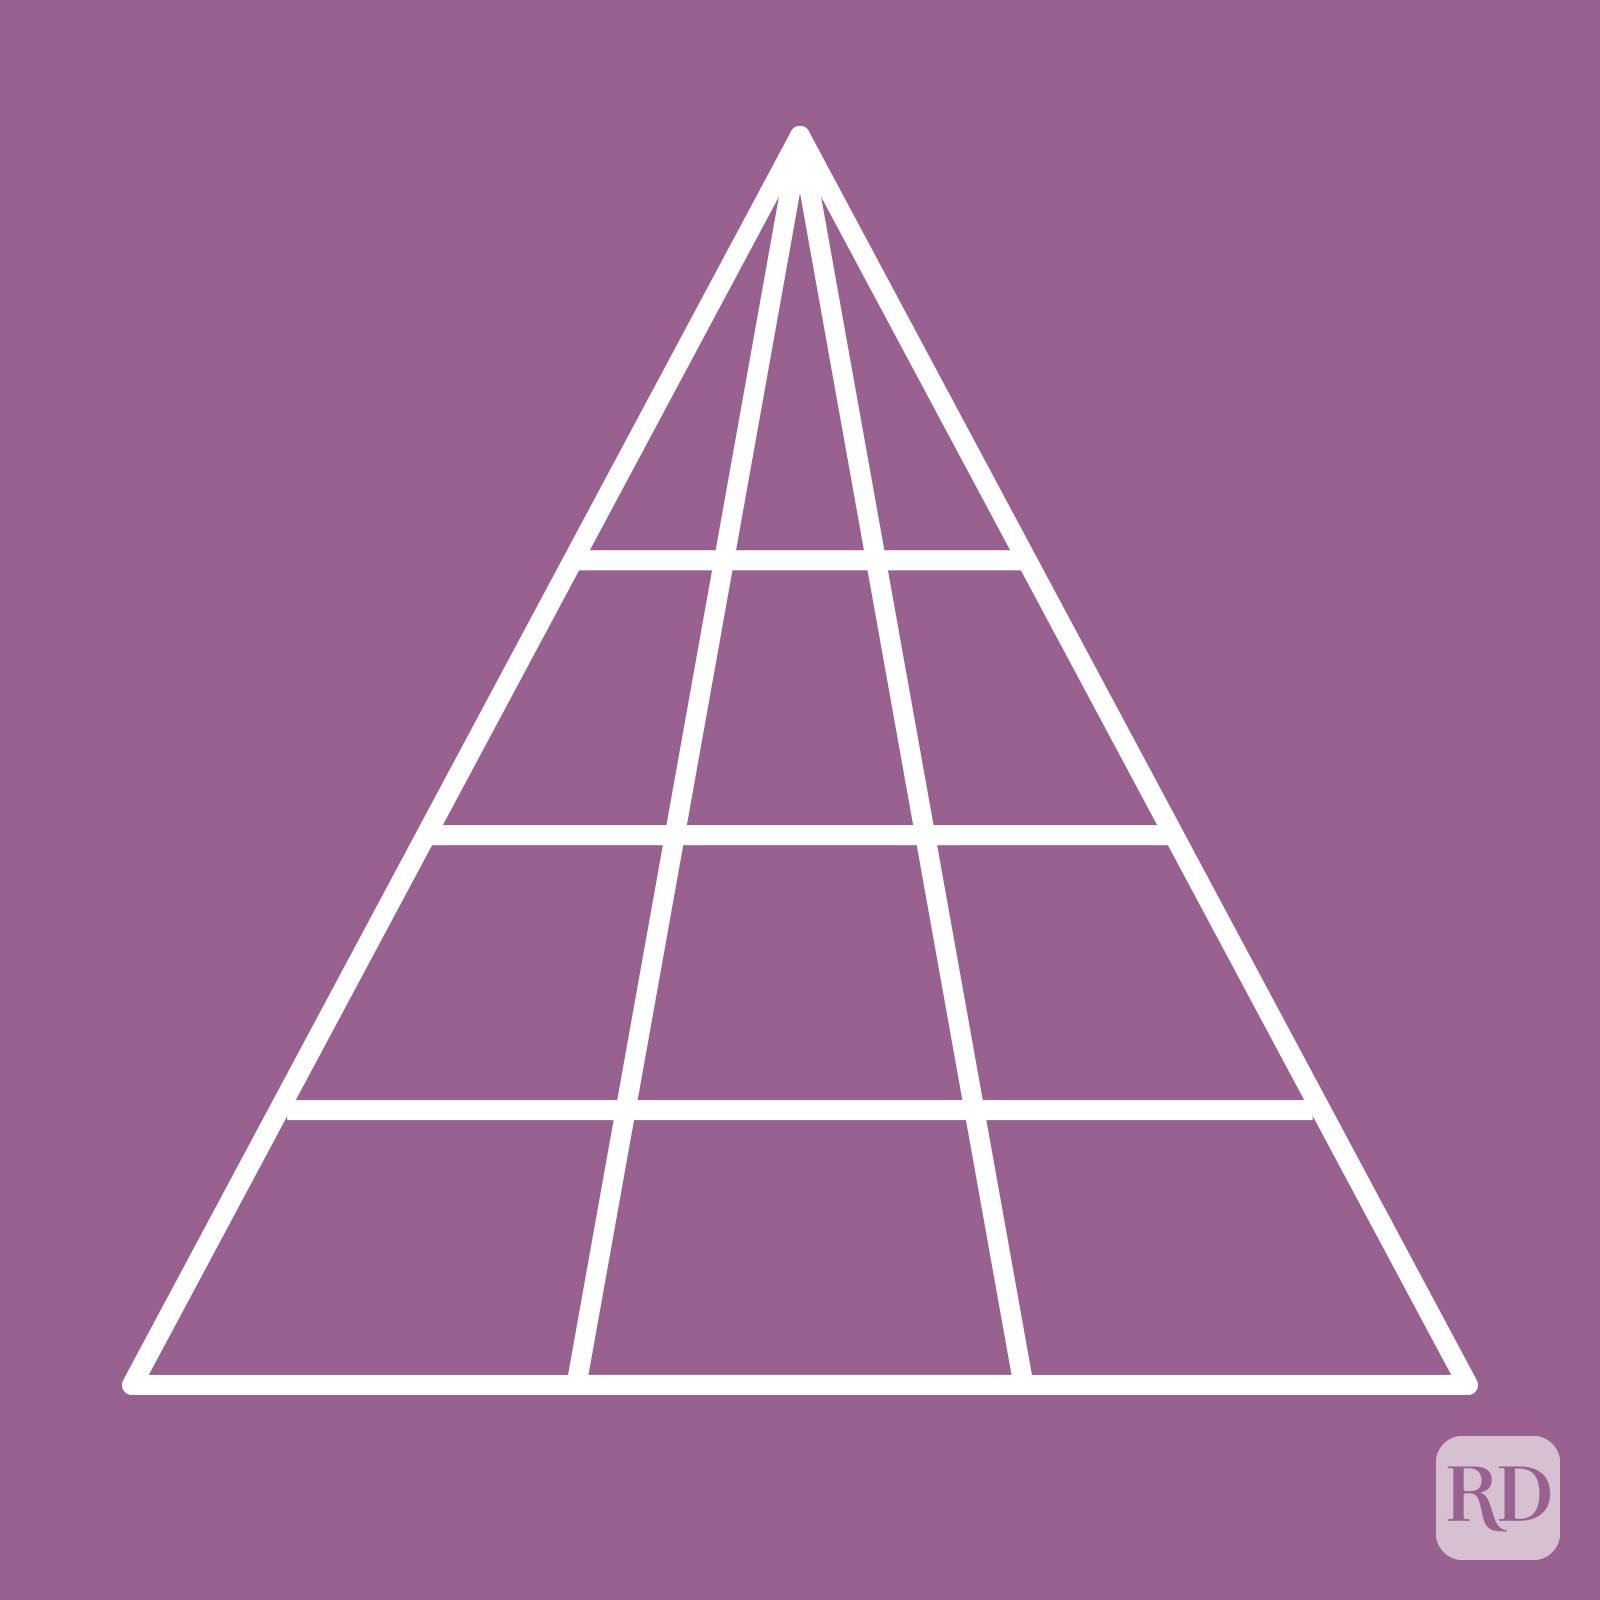 How Many Triangles Do You See? Test Yourself, Then Learn the Answer